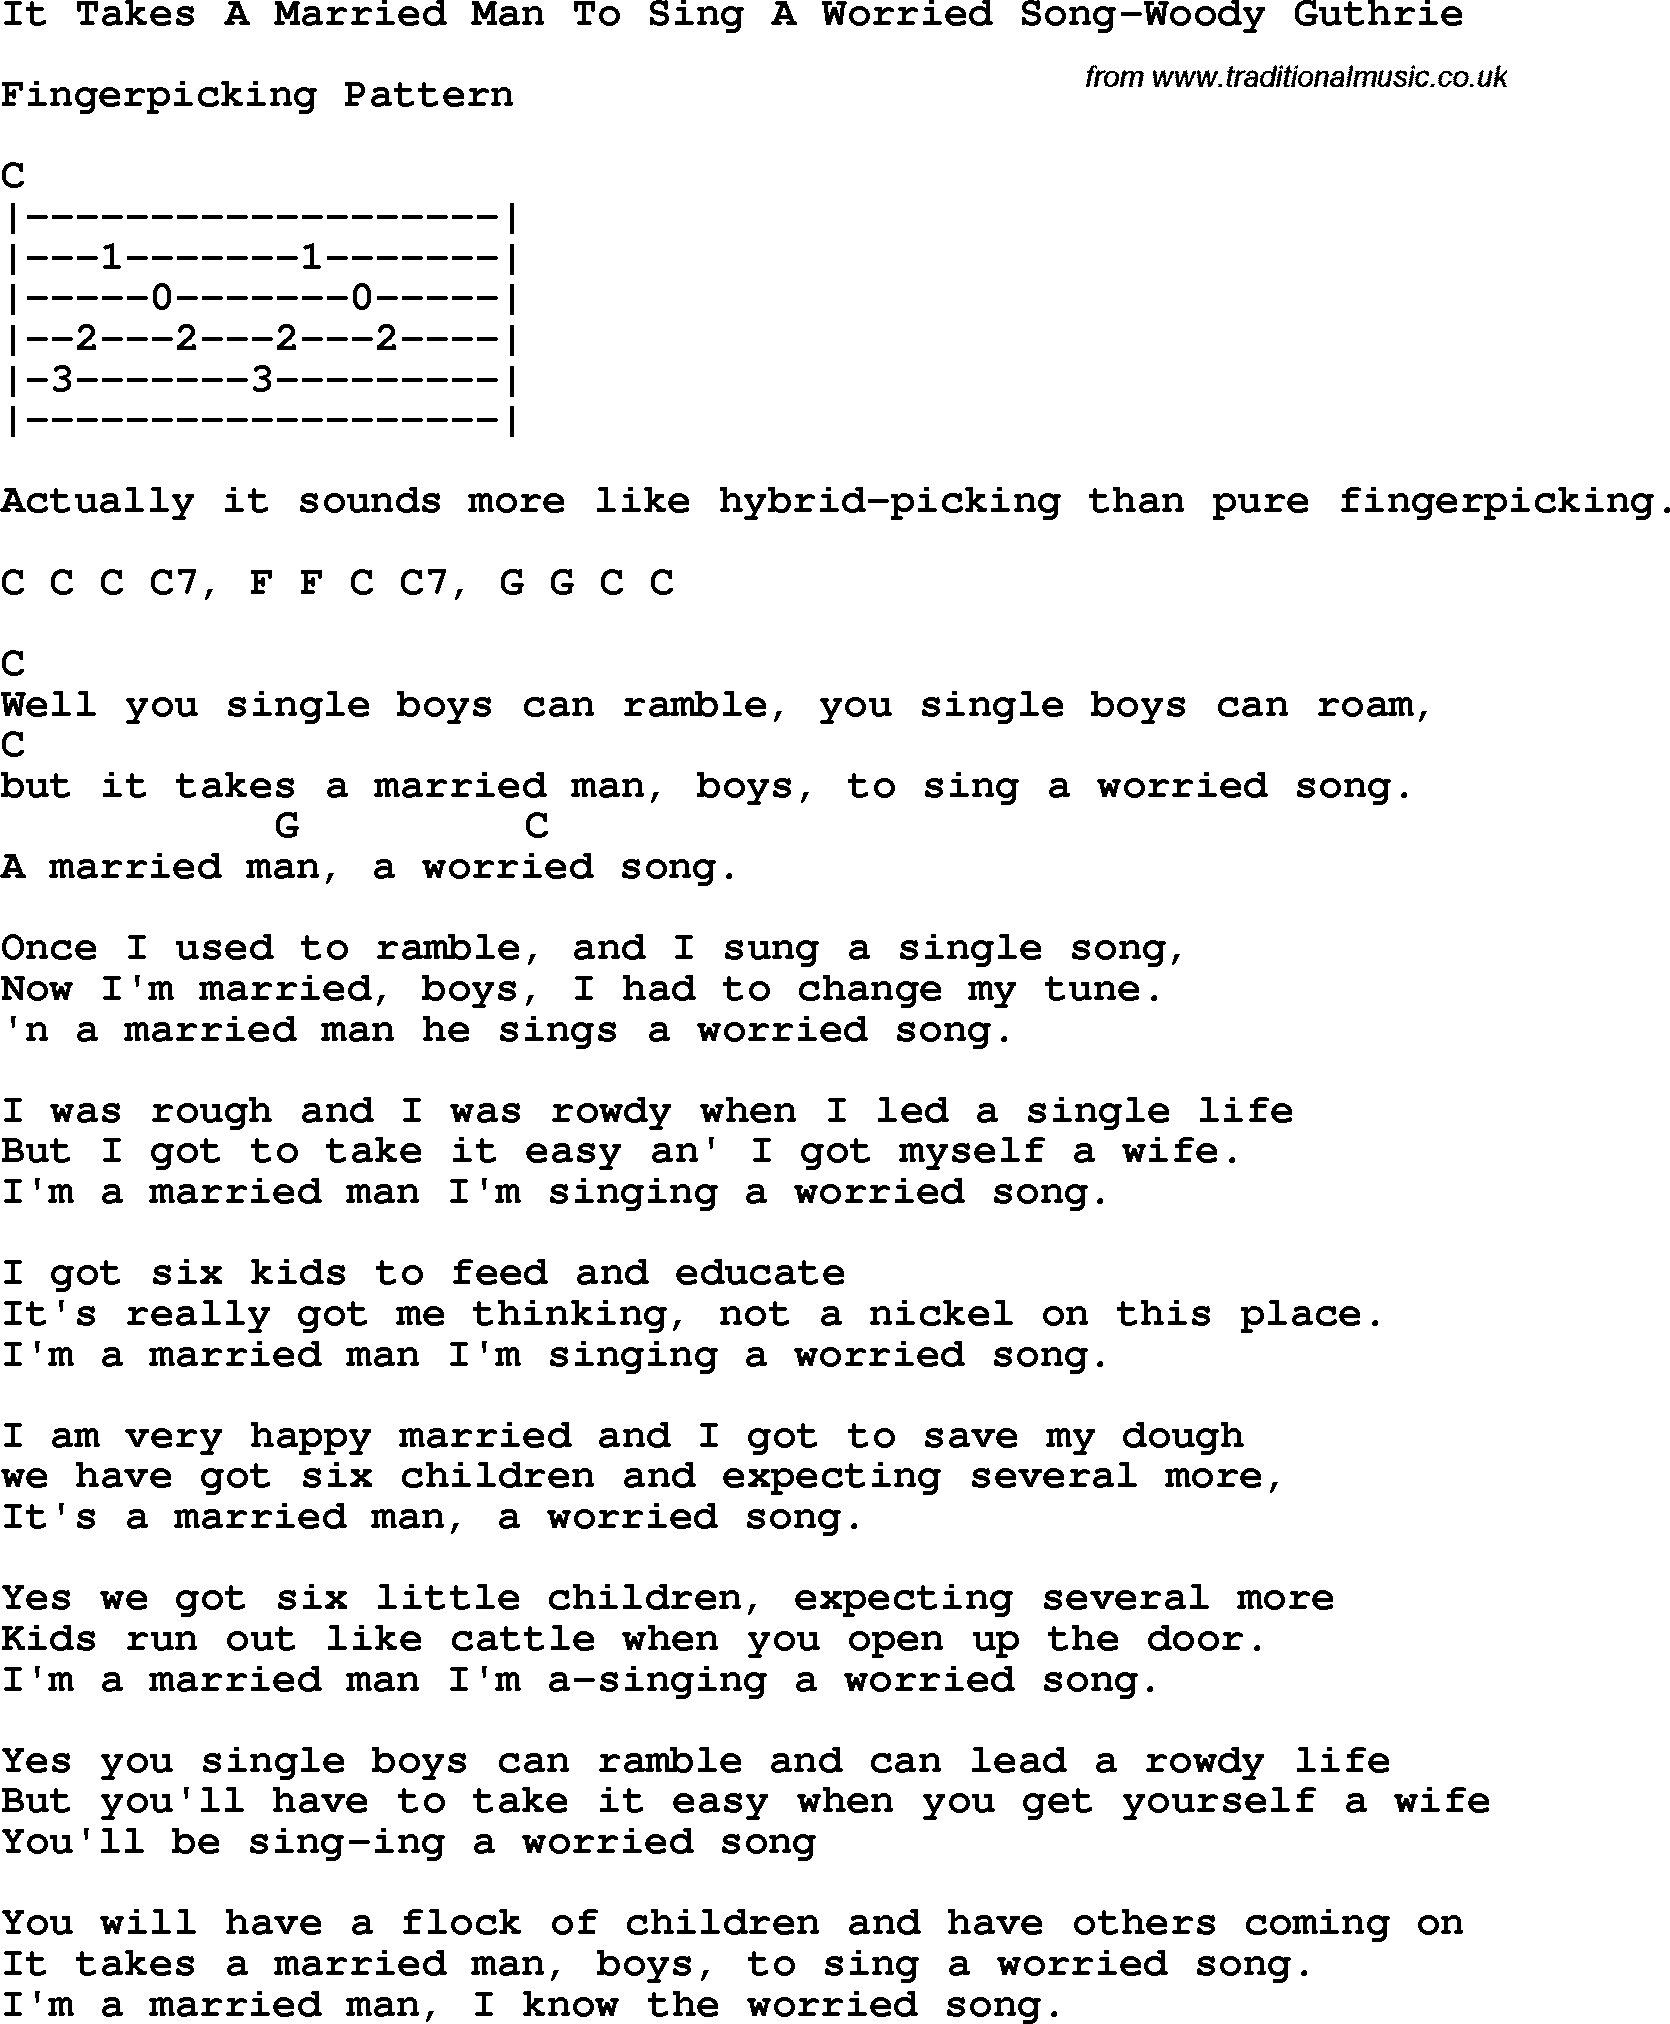 Protest Song It Takes A Married Man To Sing A Worried Song-Woody Guthrie lyrics and chords